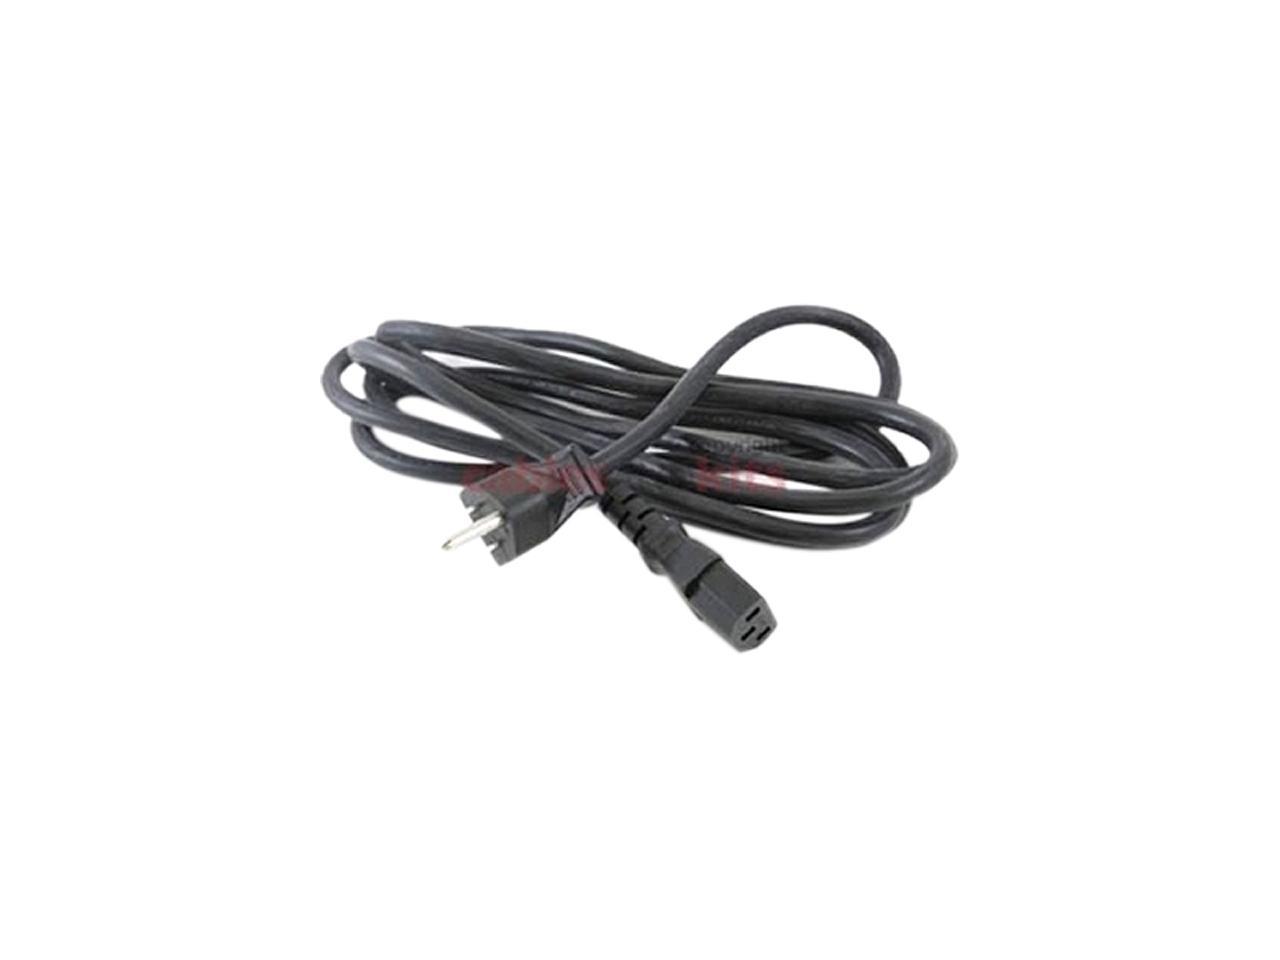 Cisco AC Power Cord for Cisco Catalyst 3850 (North America) - For Network Switch - 110 V AC -